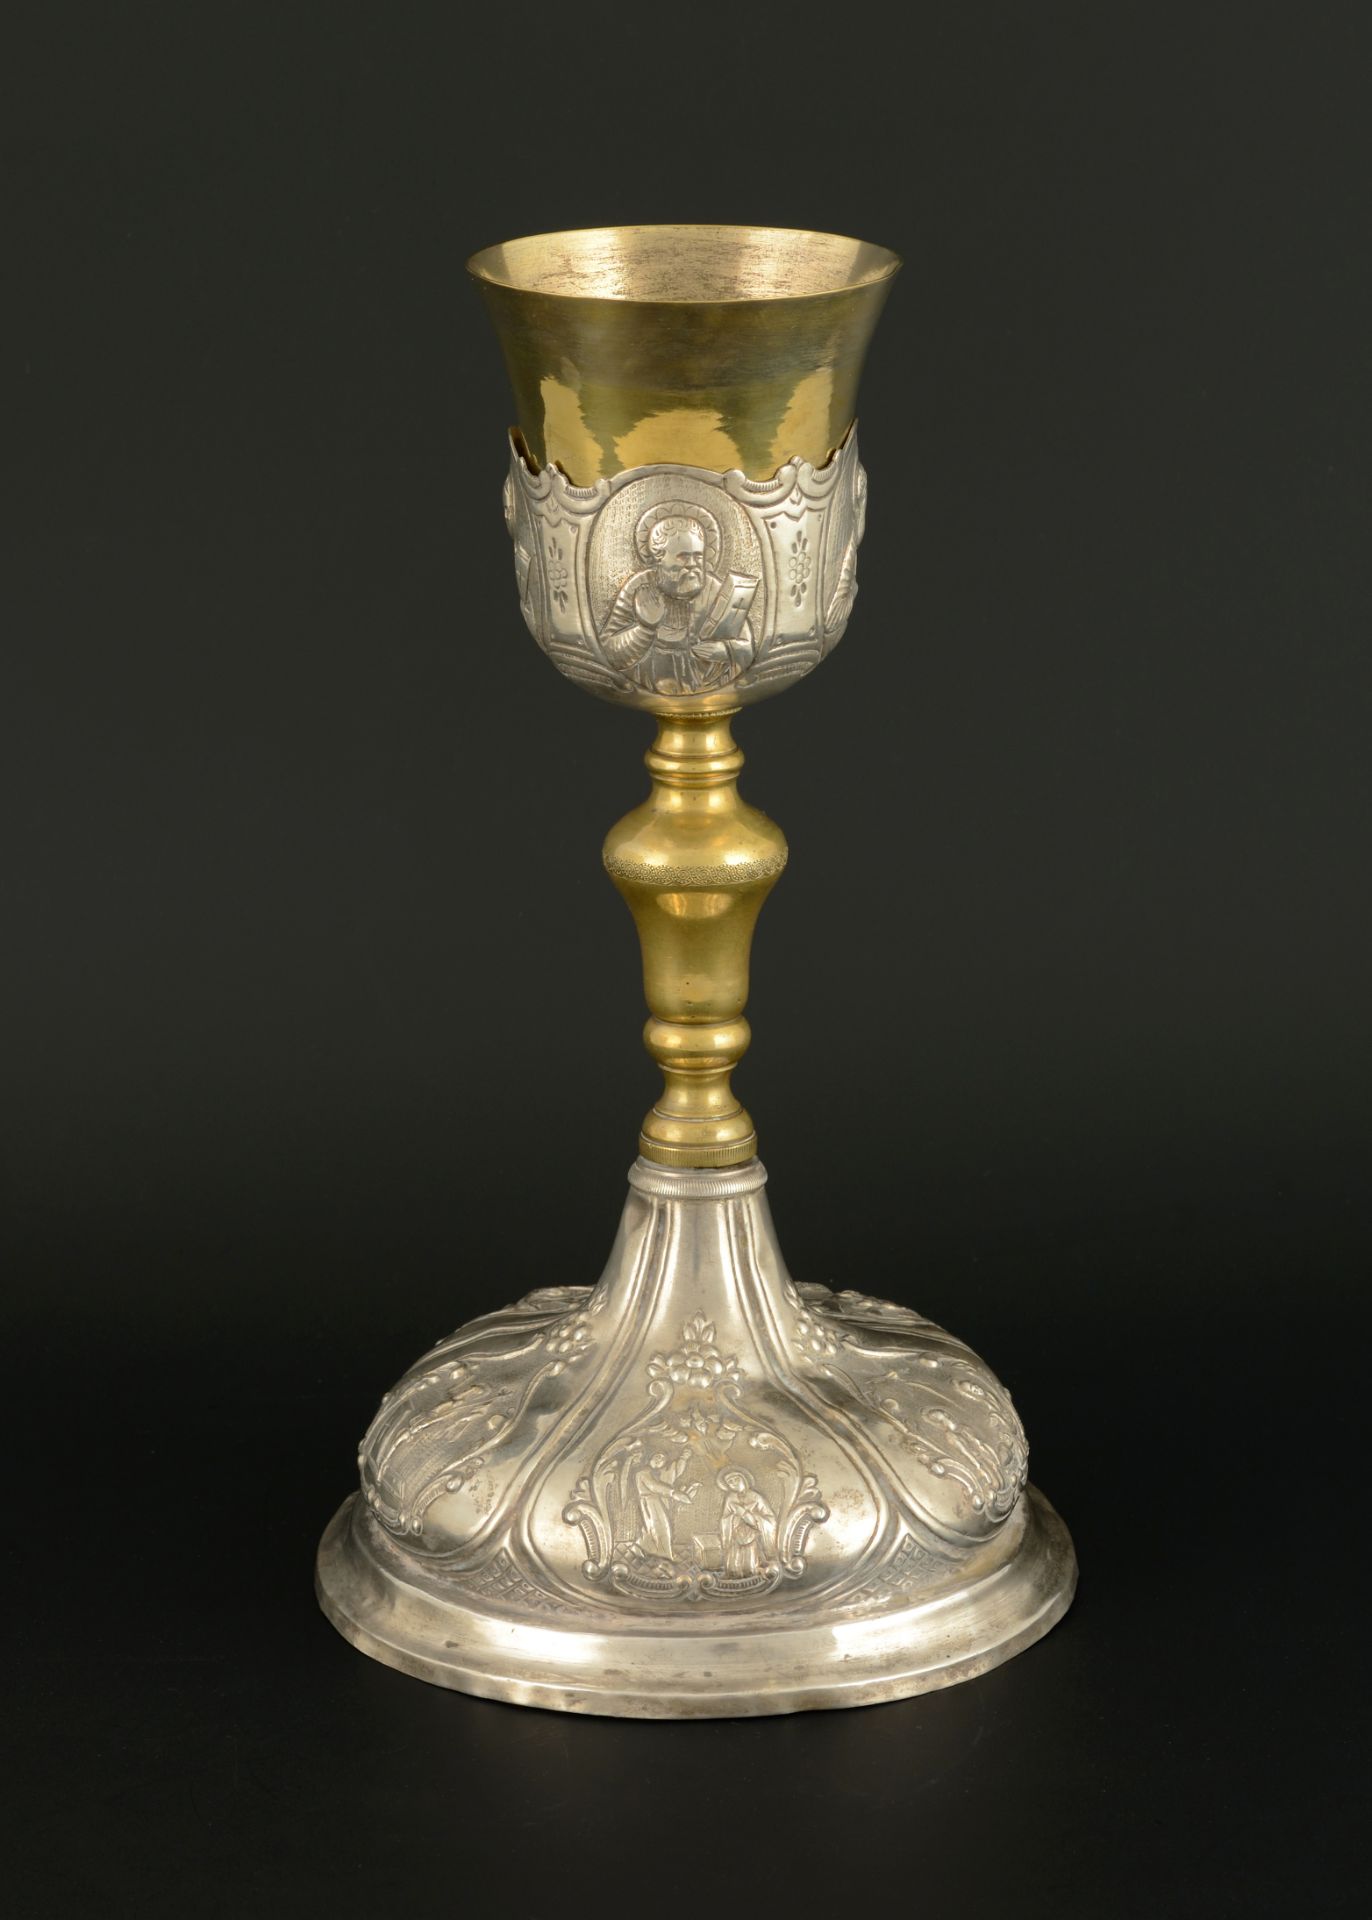  Holy Communion cup 